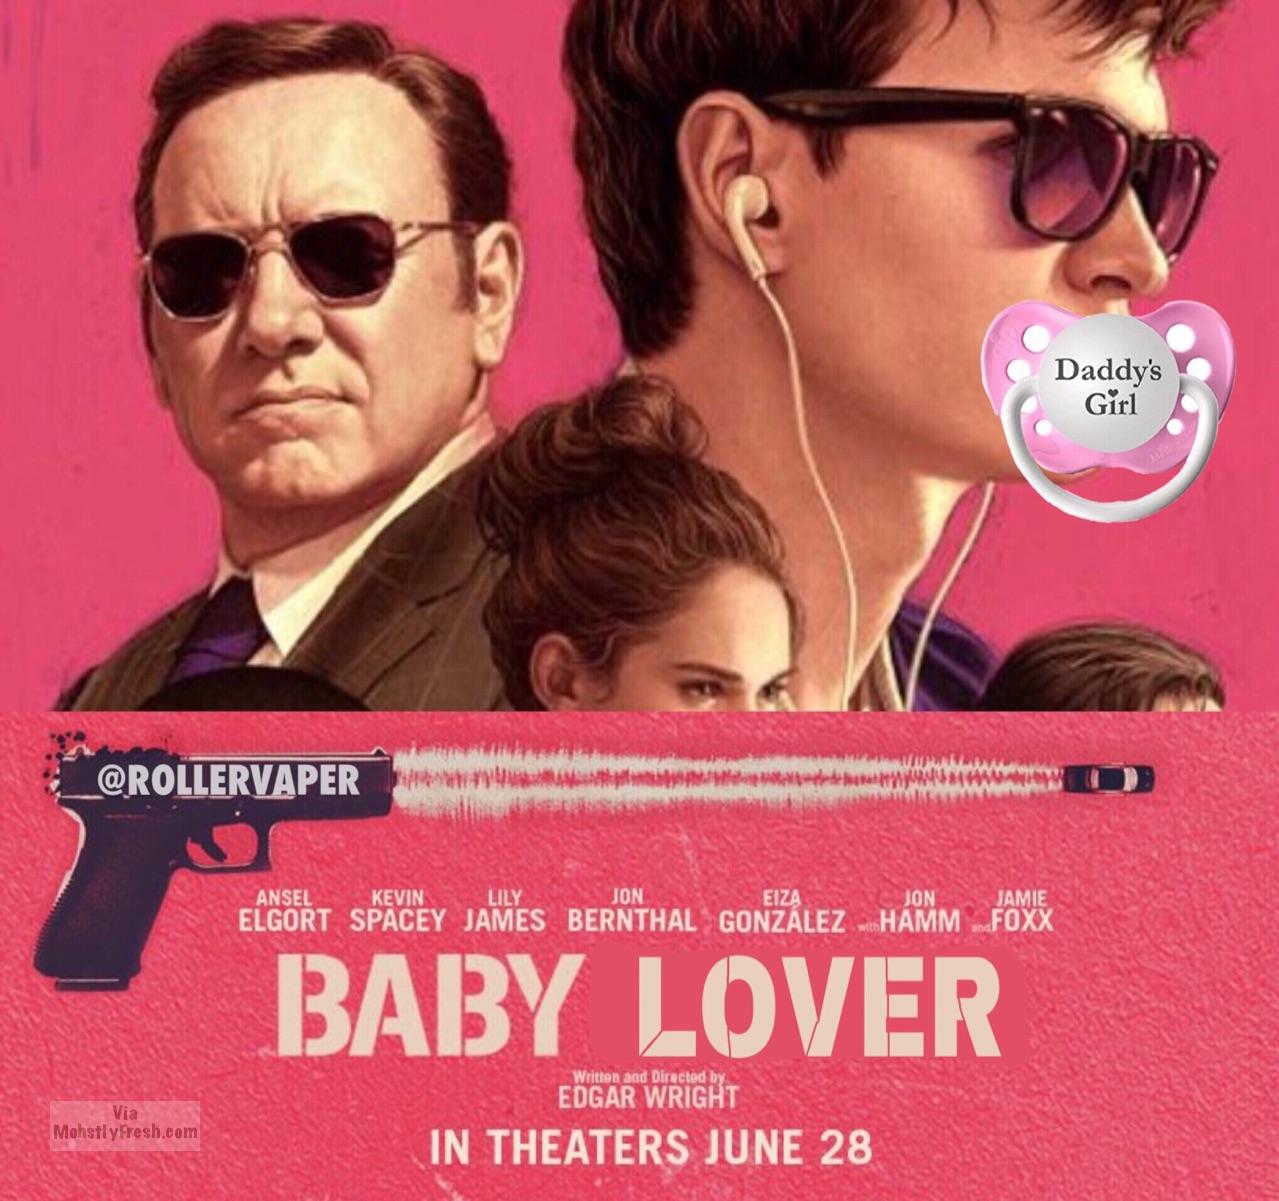 memes - baby driver - Daddy's Girl Www Millim e ter home Jon Ansel Kevin Lily Eiza Jon Jamie Elgort Spacey James Benthal Gonzalez Hamm F0XX Baby Lover Written and Directed by Via MohstlyFresh.com Edgar Wright In Theaters June 28